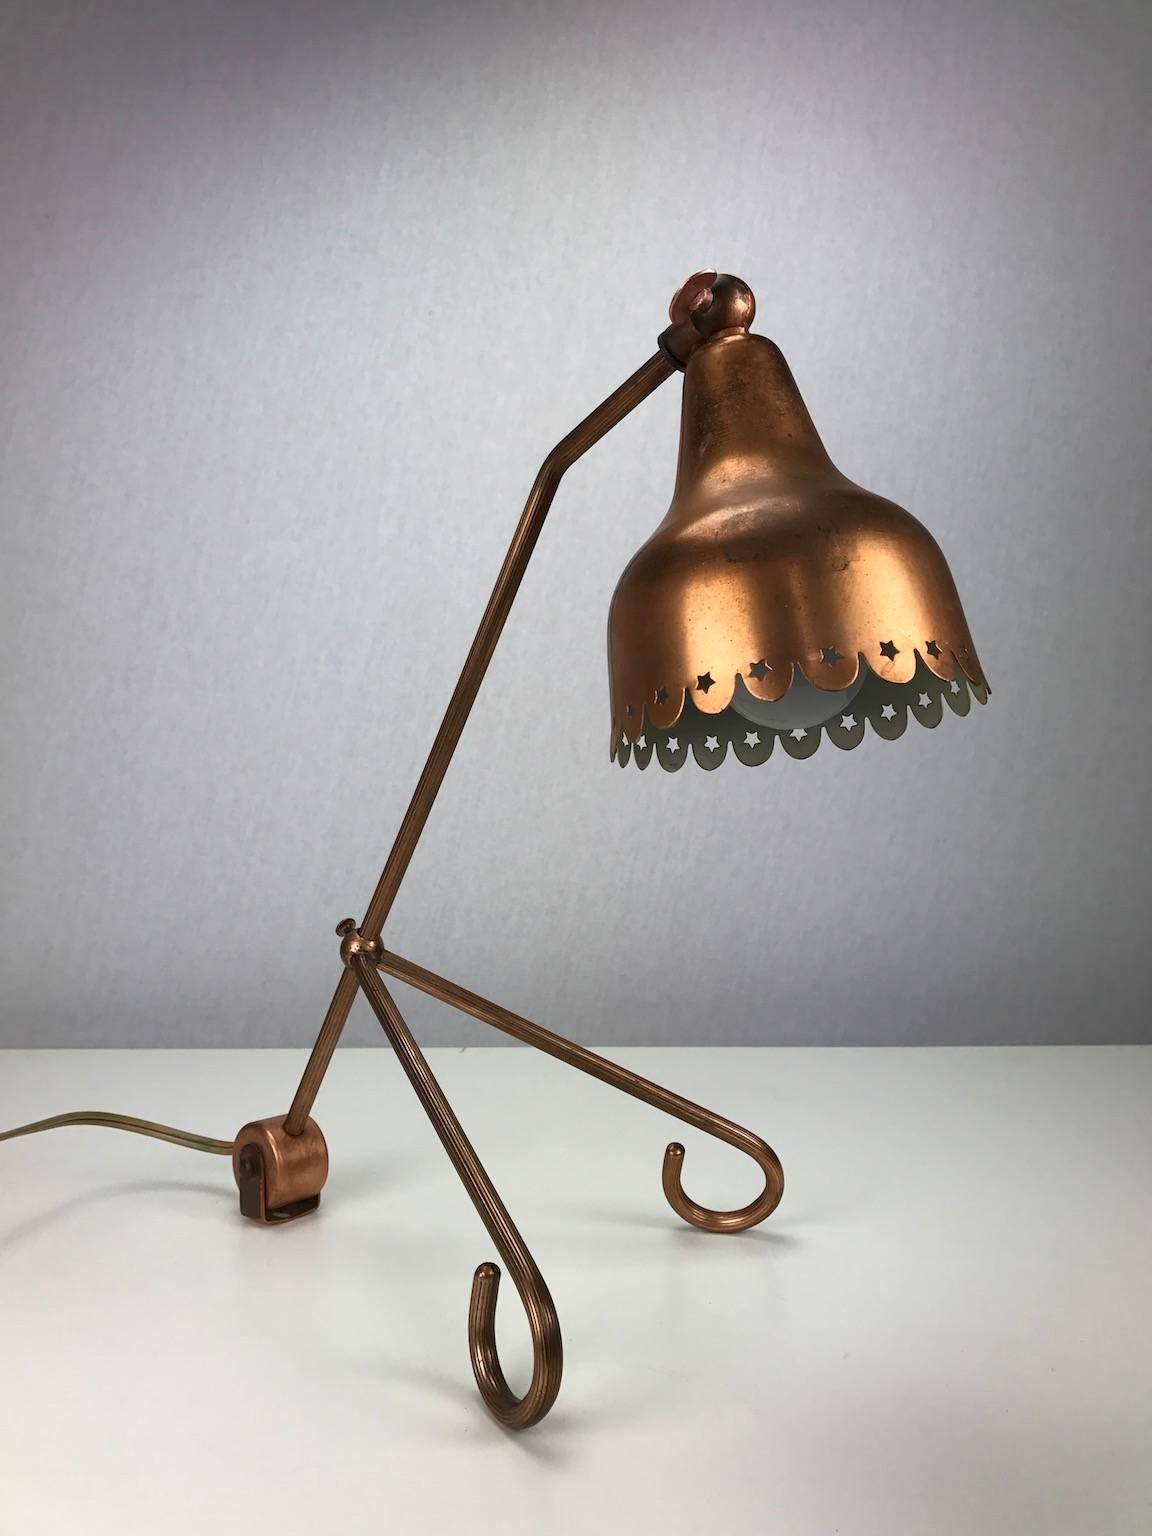 Mid-20th Century Copper Table Lamp by Svens Aage Holm Sørensen, Late 1950s